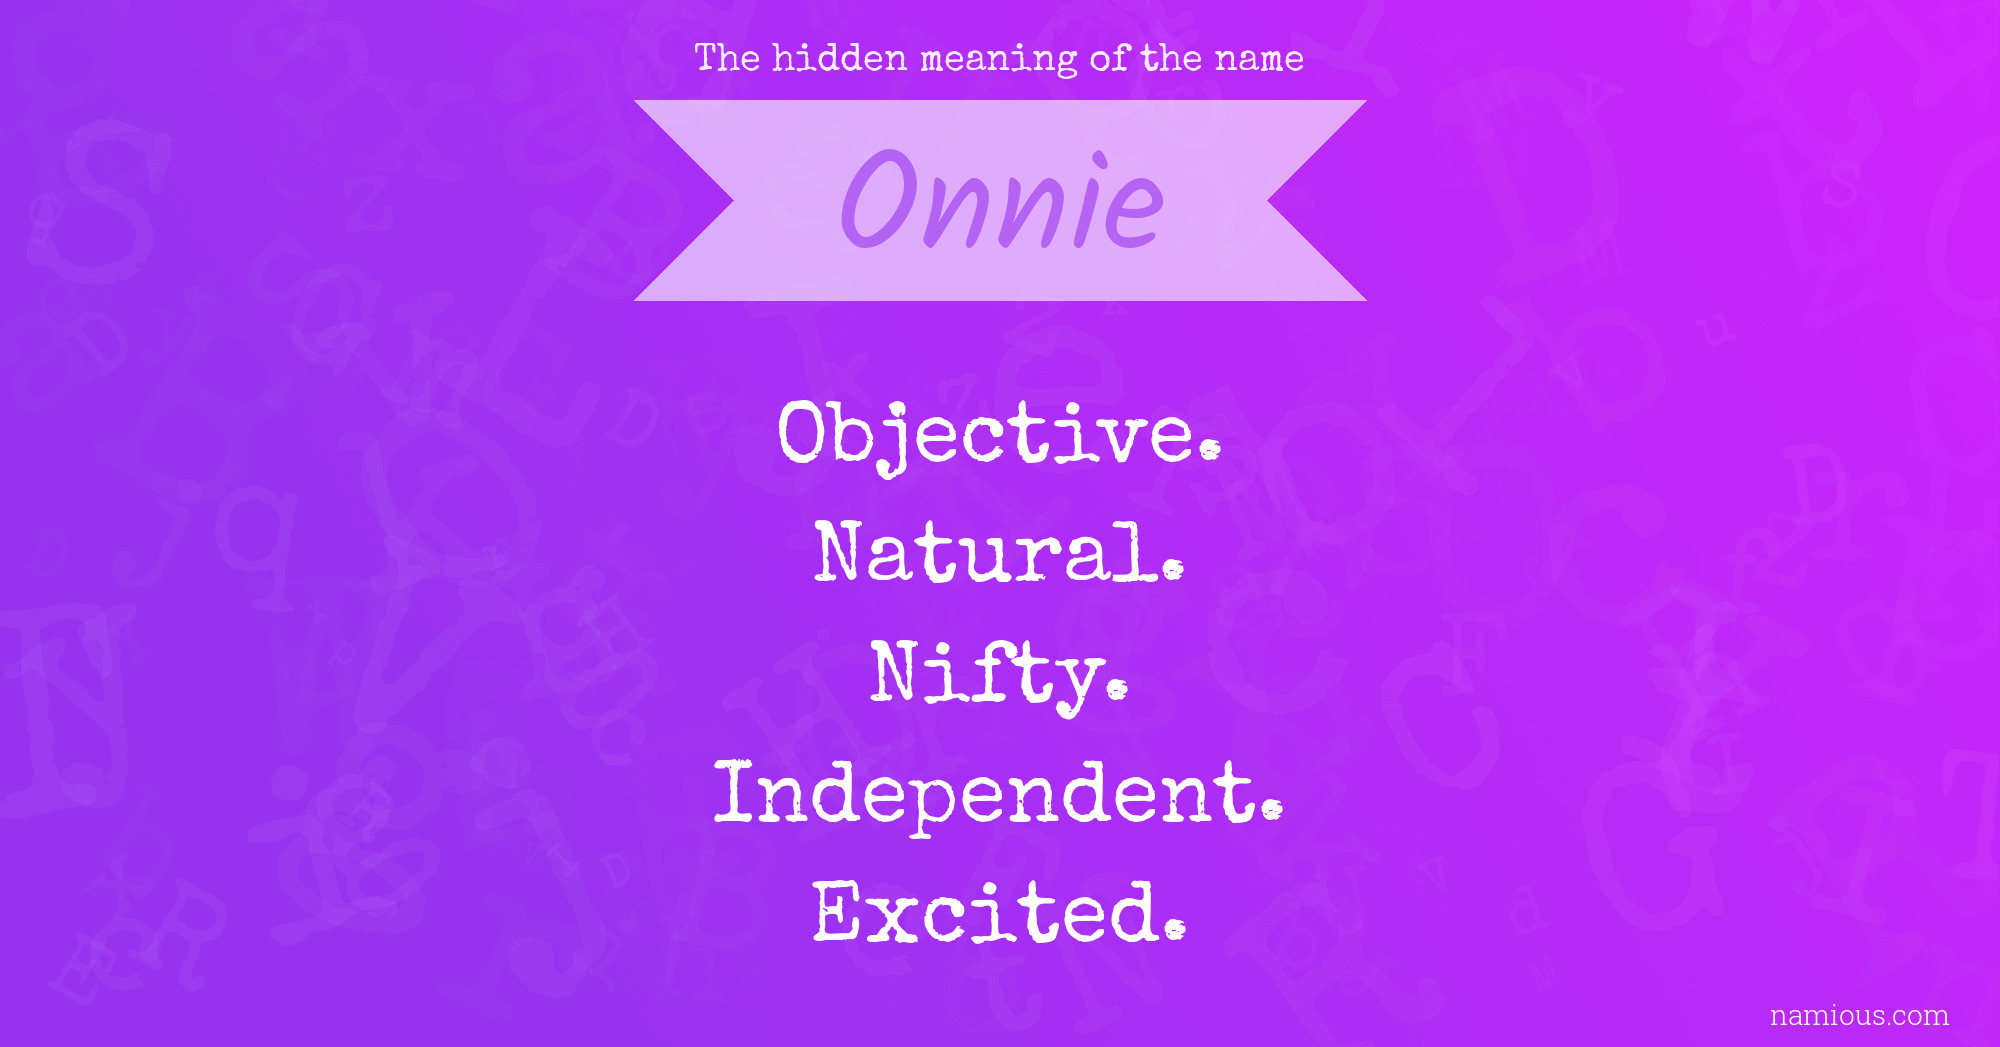 The hidden meaning of the name Onnie